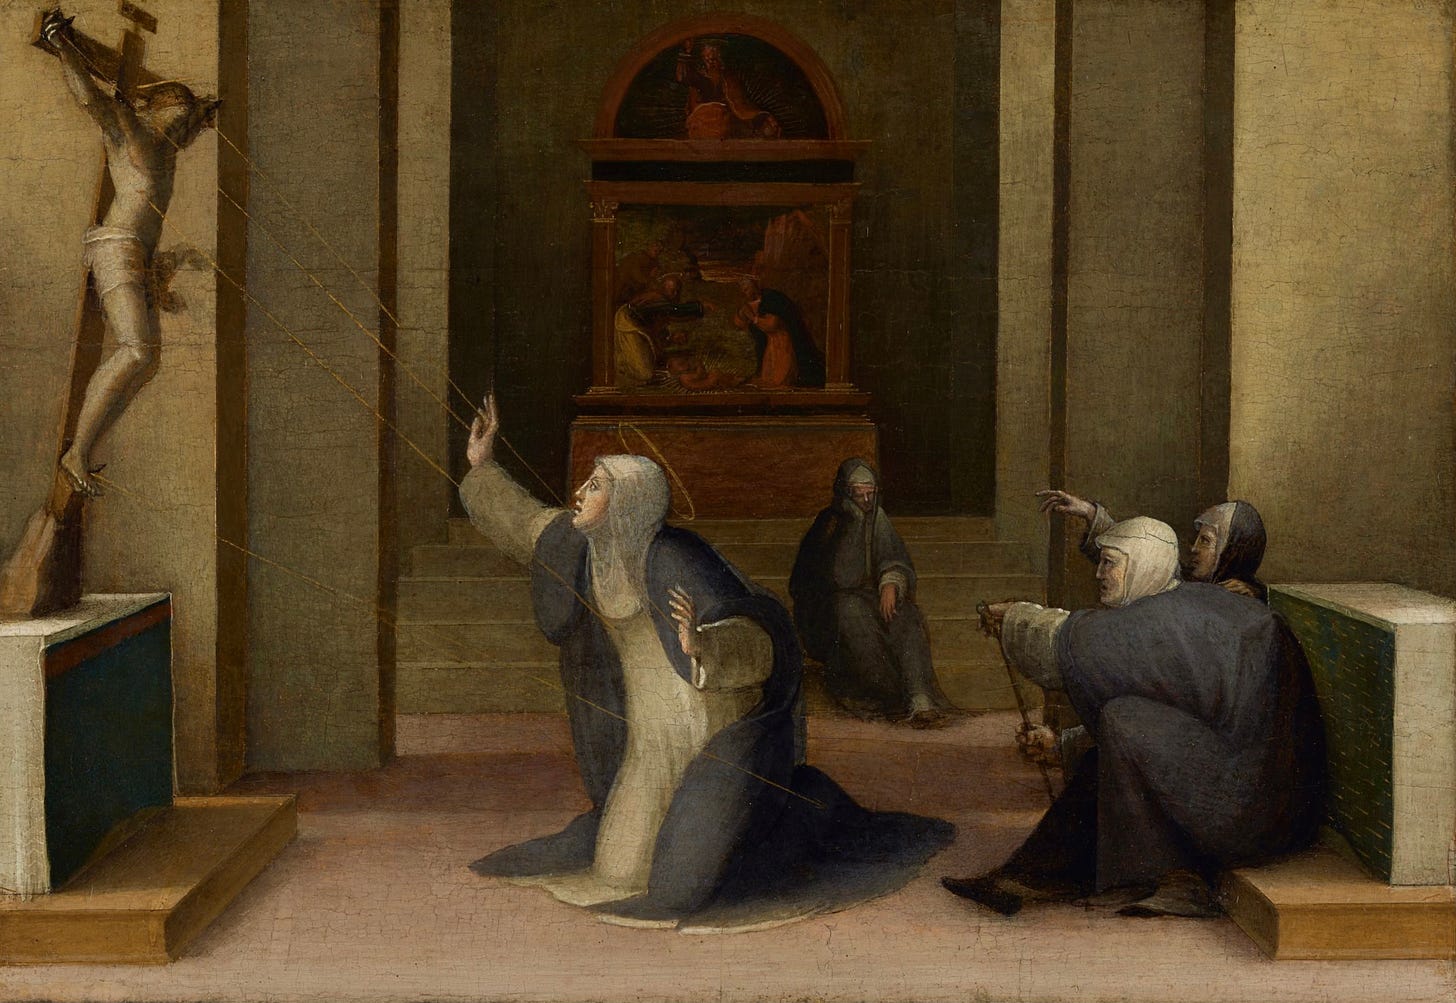 Catherine of Siena in black and white robe in front of Crucifix receiving stigmata